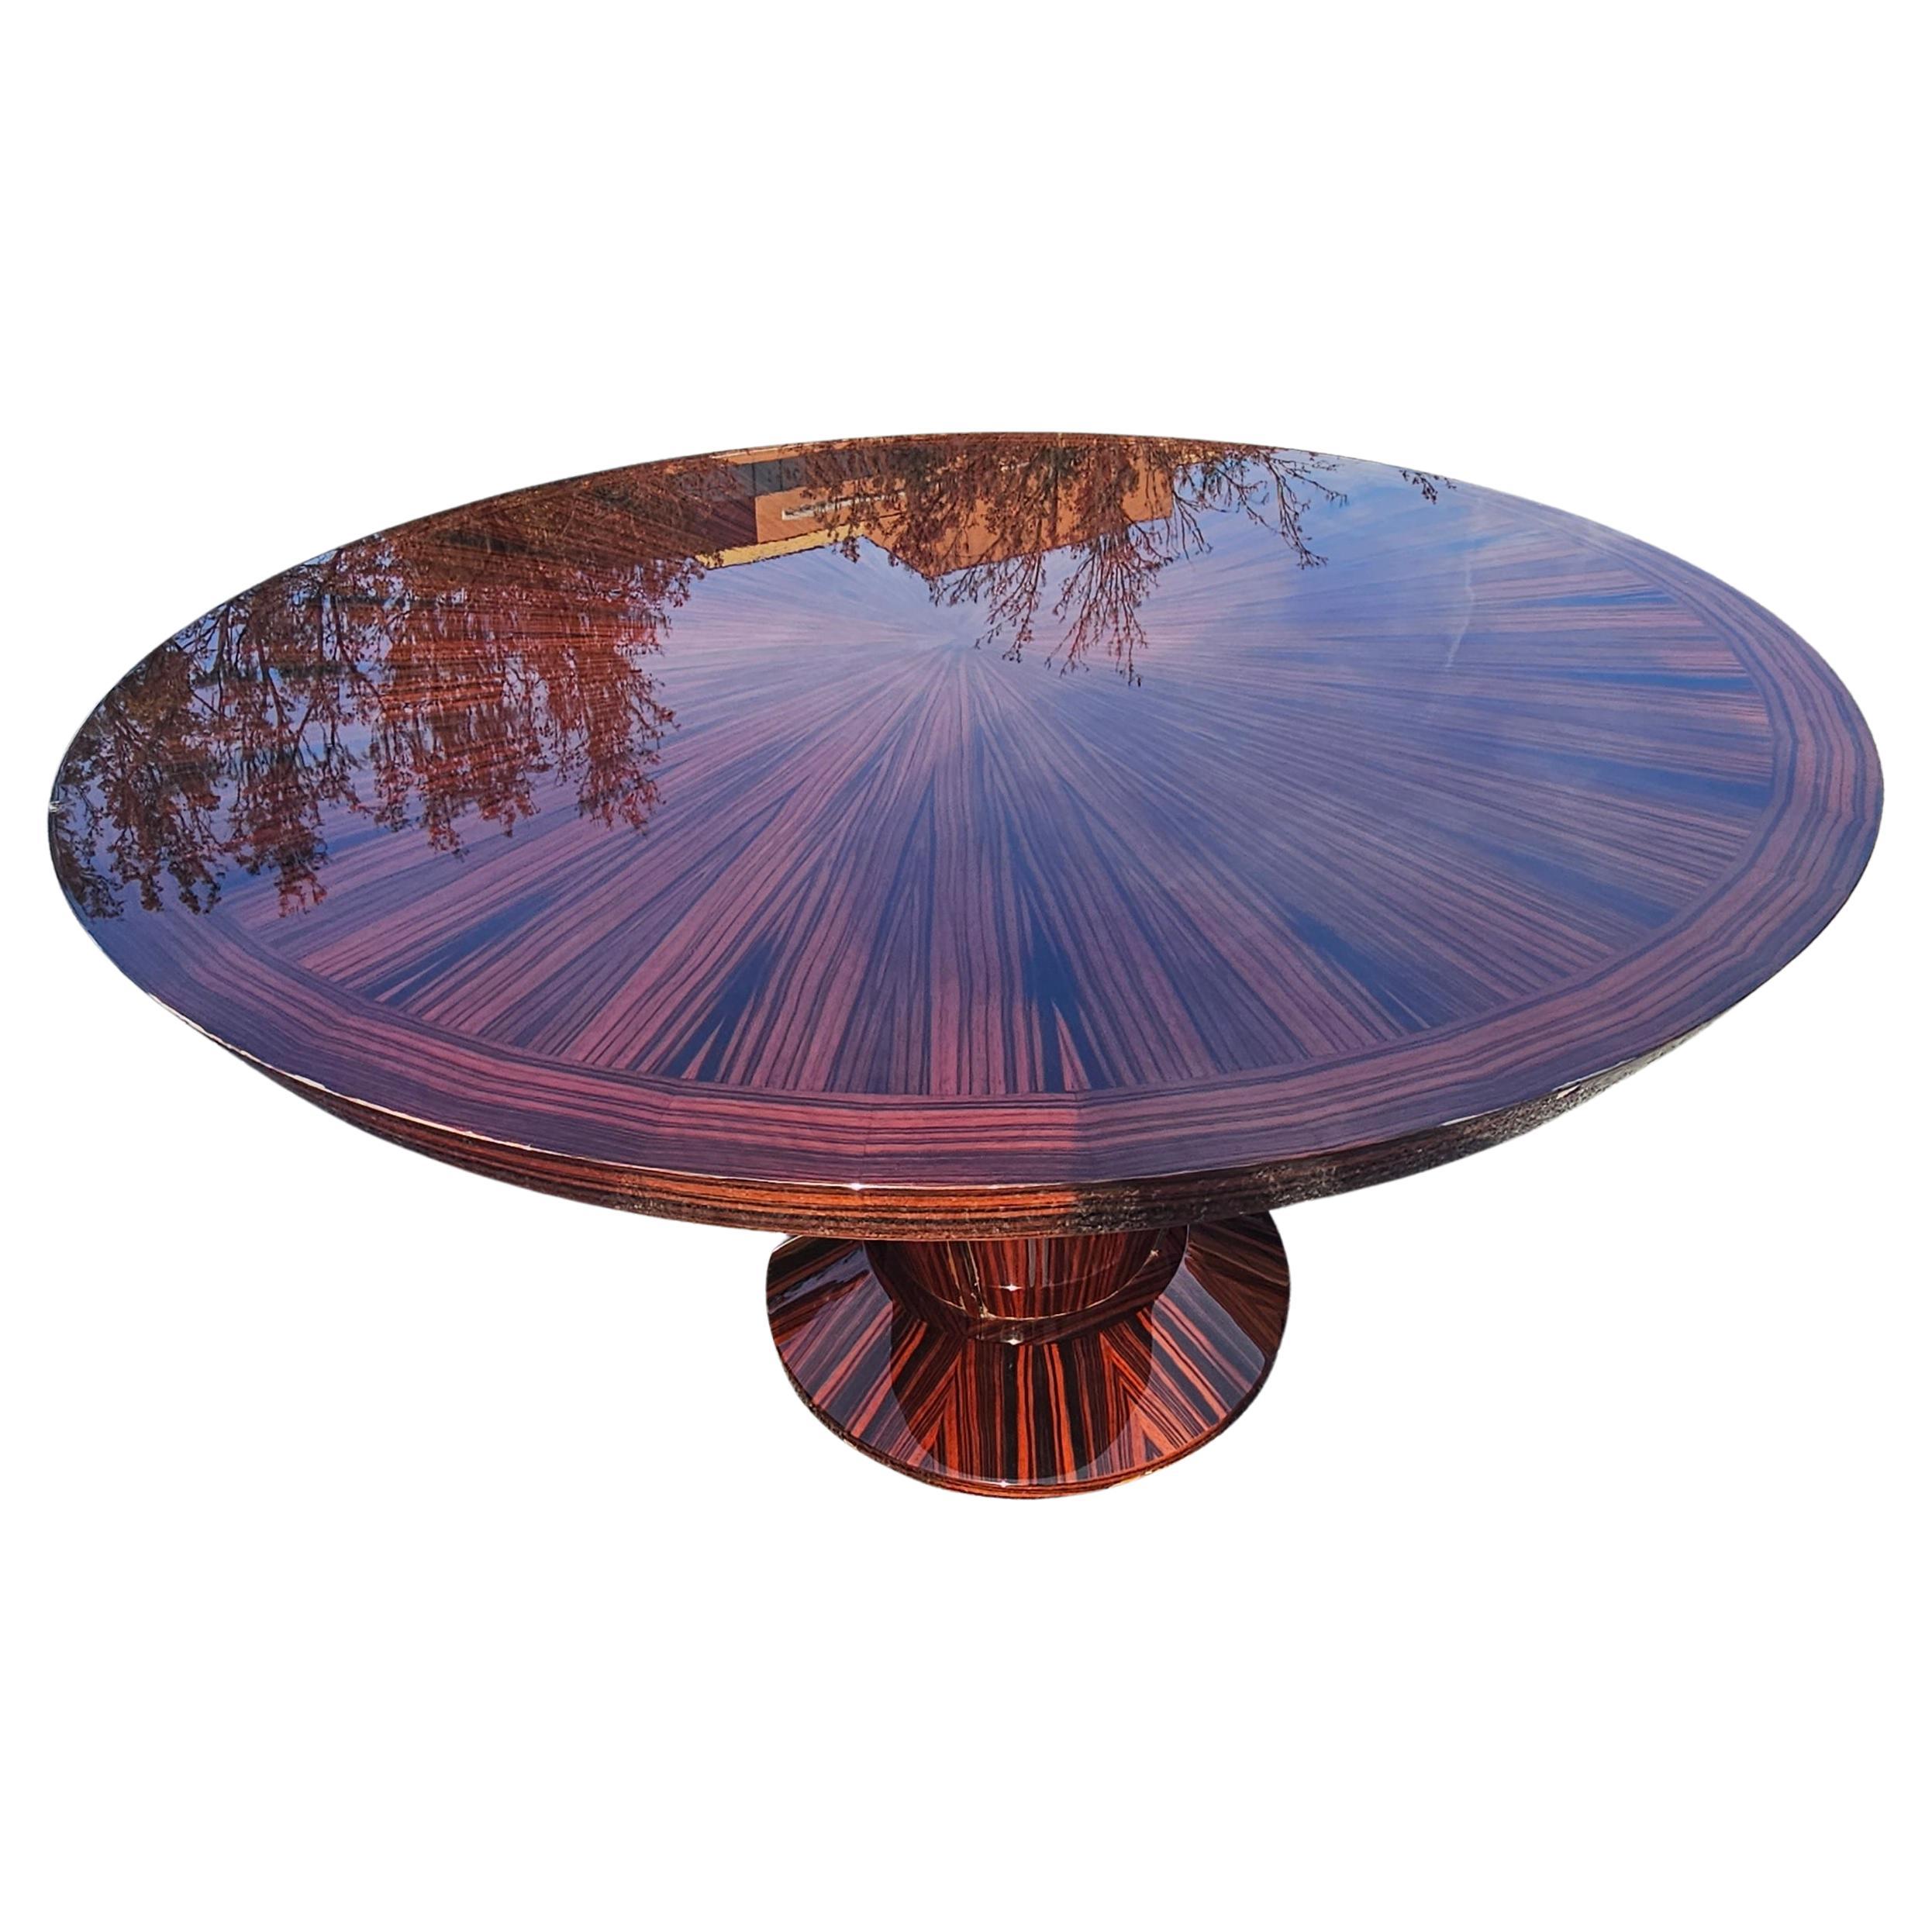 A 21st Century modern Dakota Jackson Heraldic Collection round dining table in great vintage condition. 
The eye-catching, geometric patterns identifying the natural beauty of santos rosewood and ebony are is the hallmark of this imposing round